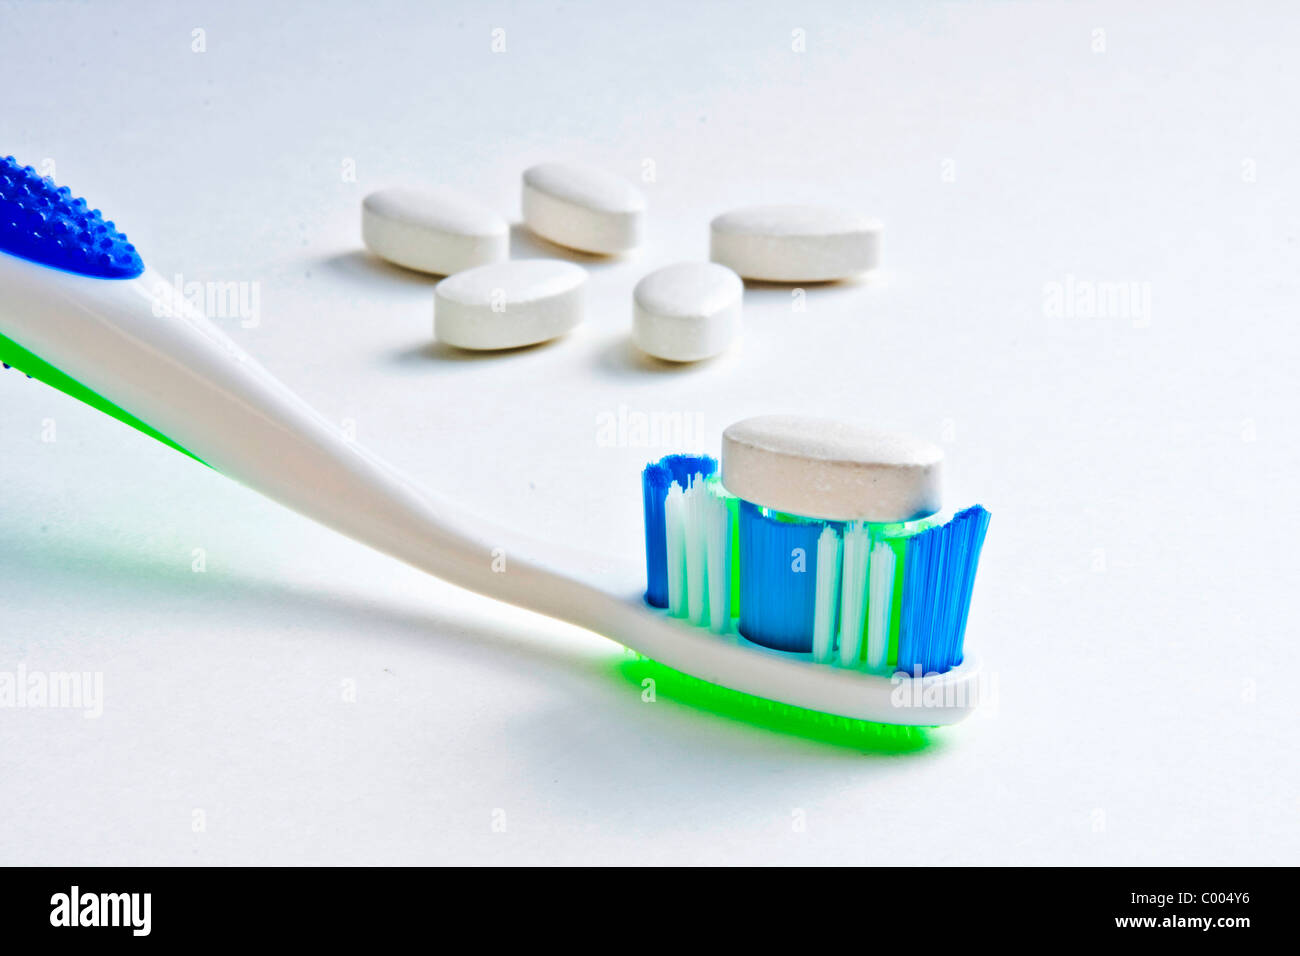 Calcium tablet resting on toothbrush bristles with other tablets in background Stock Photo